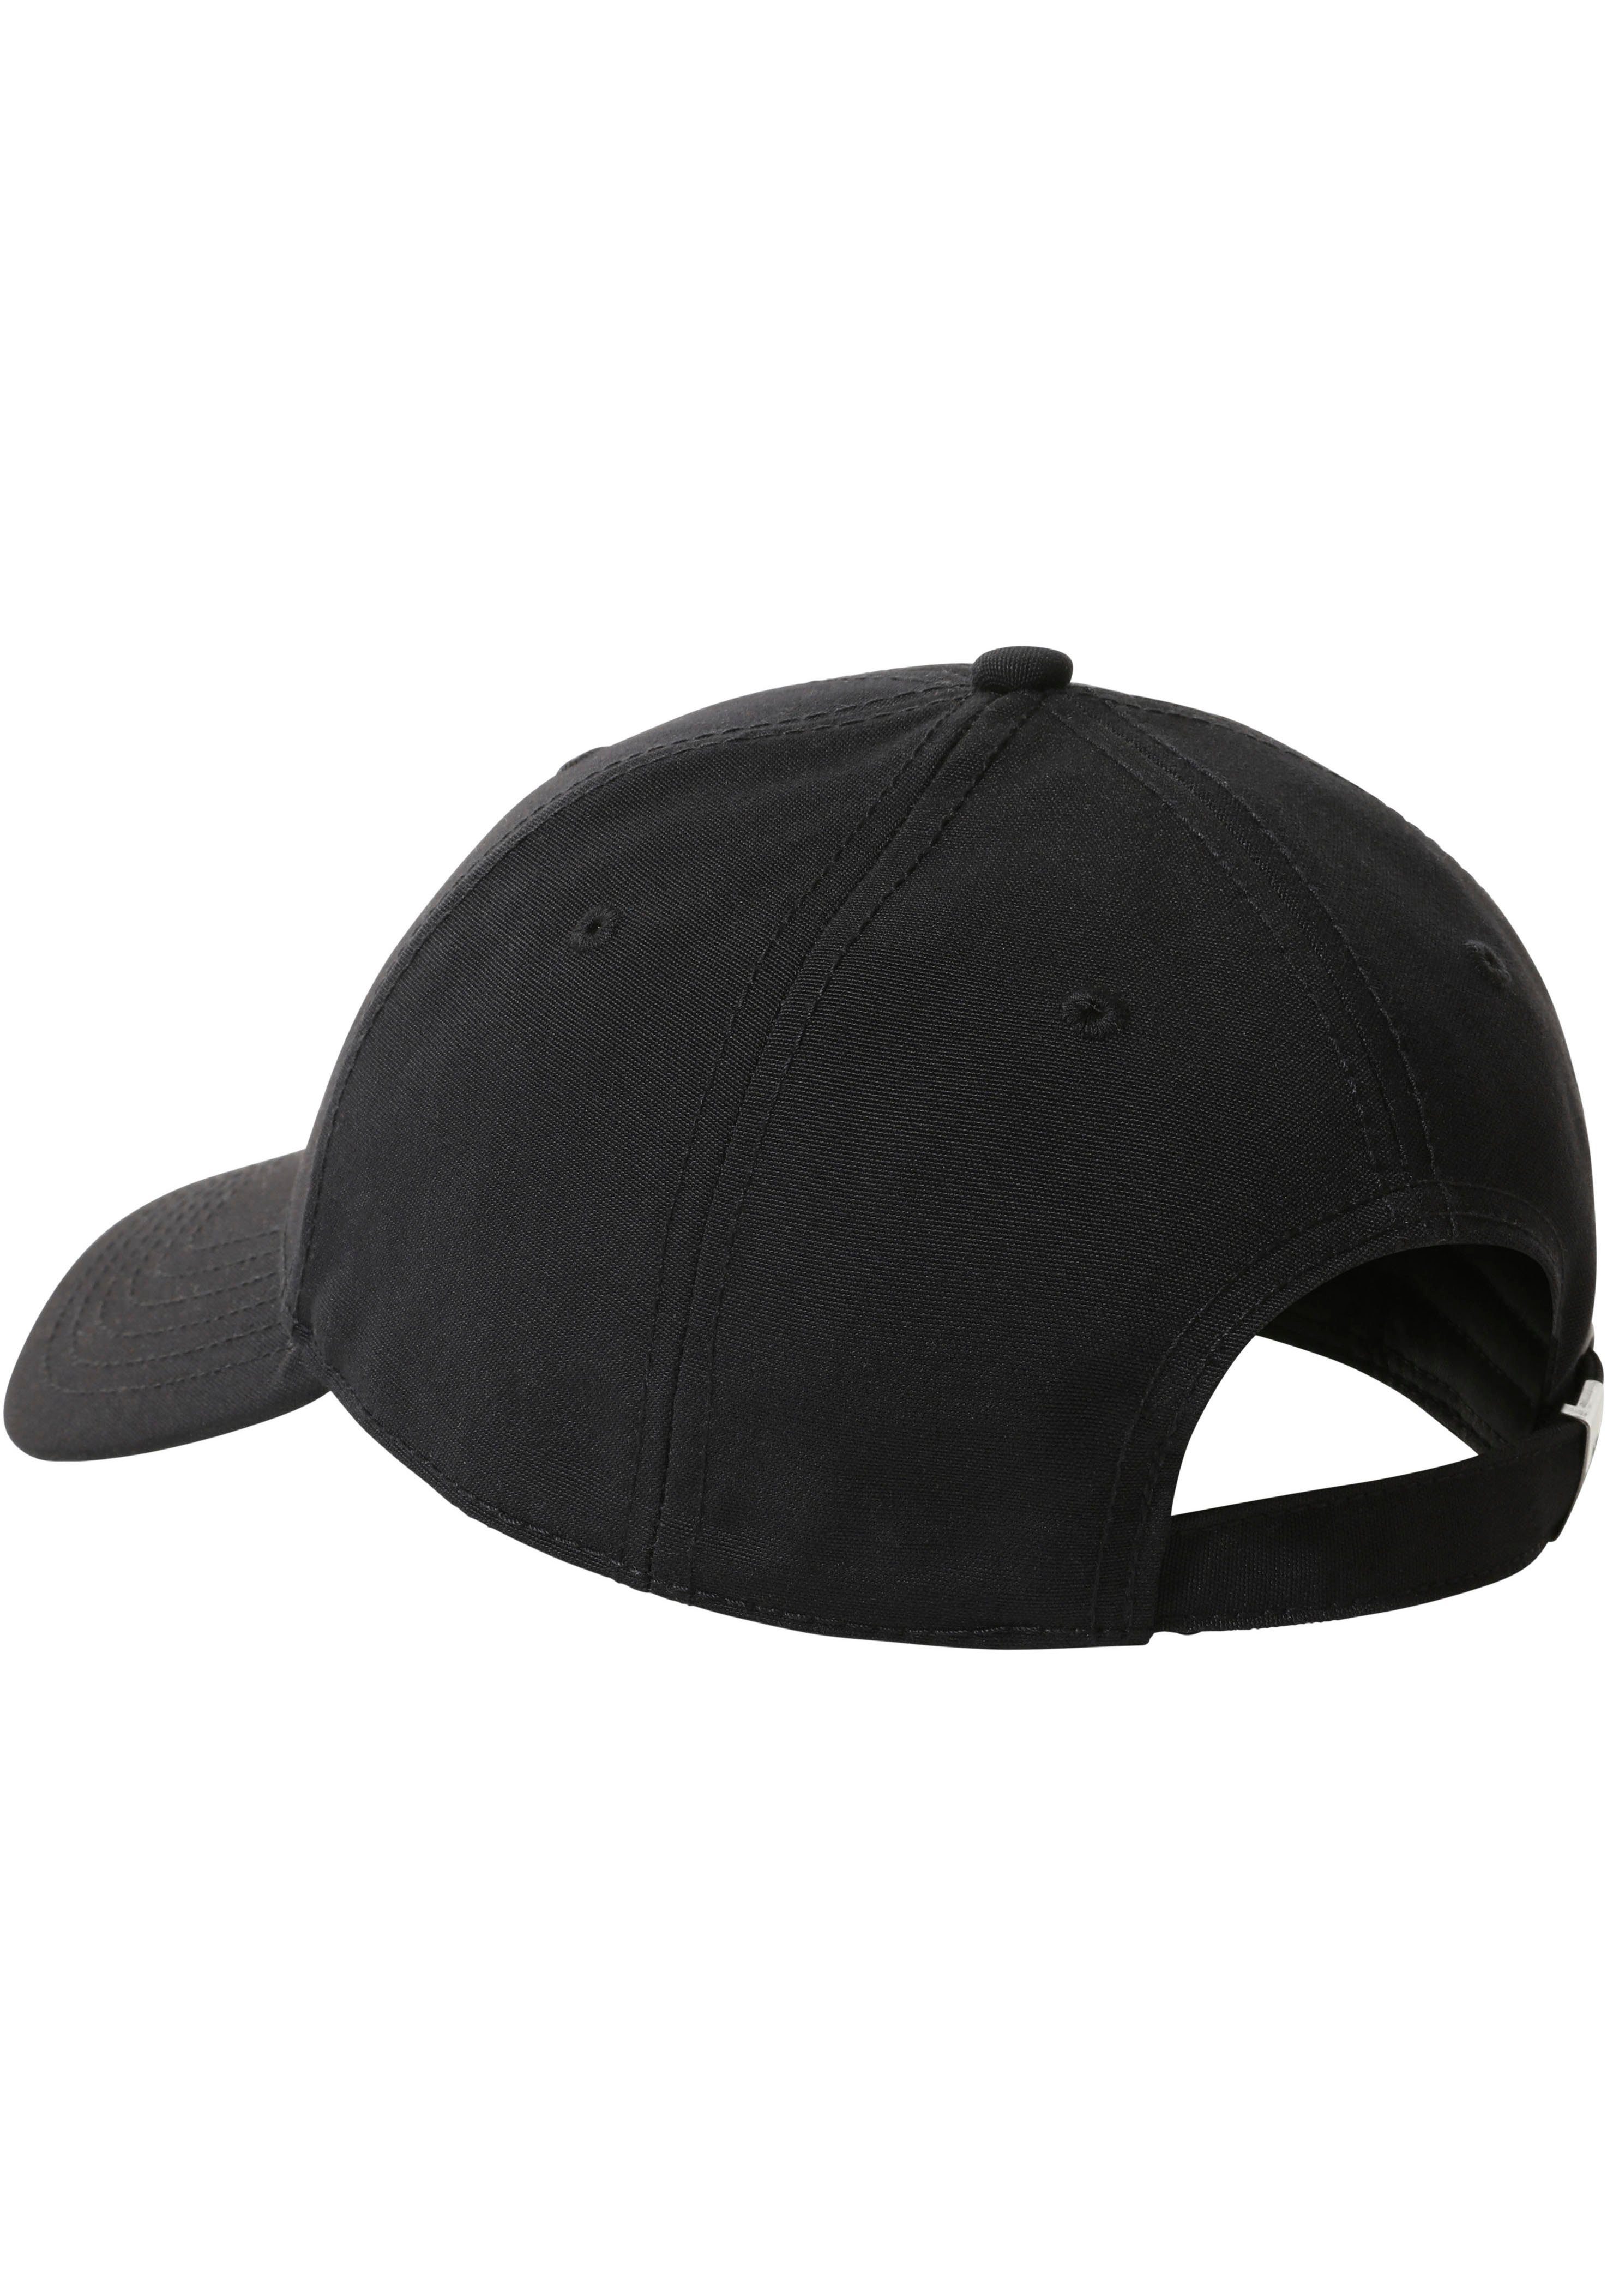 RECYCLED CLASSIC Baseball The Cap Face North schwarz HAT 66